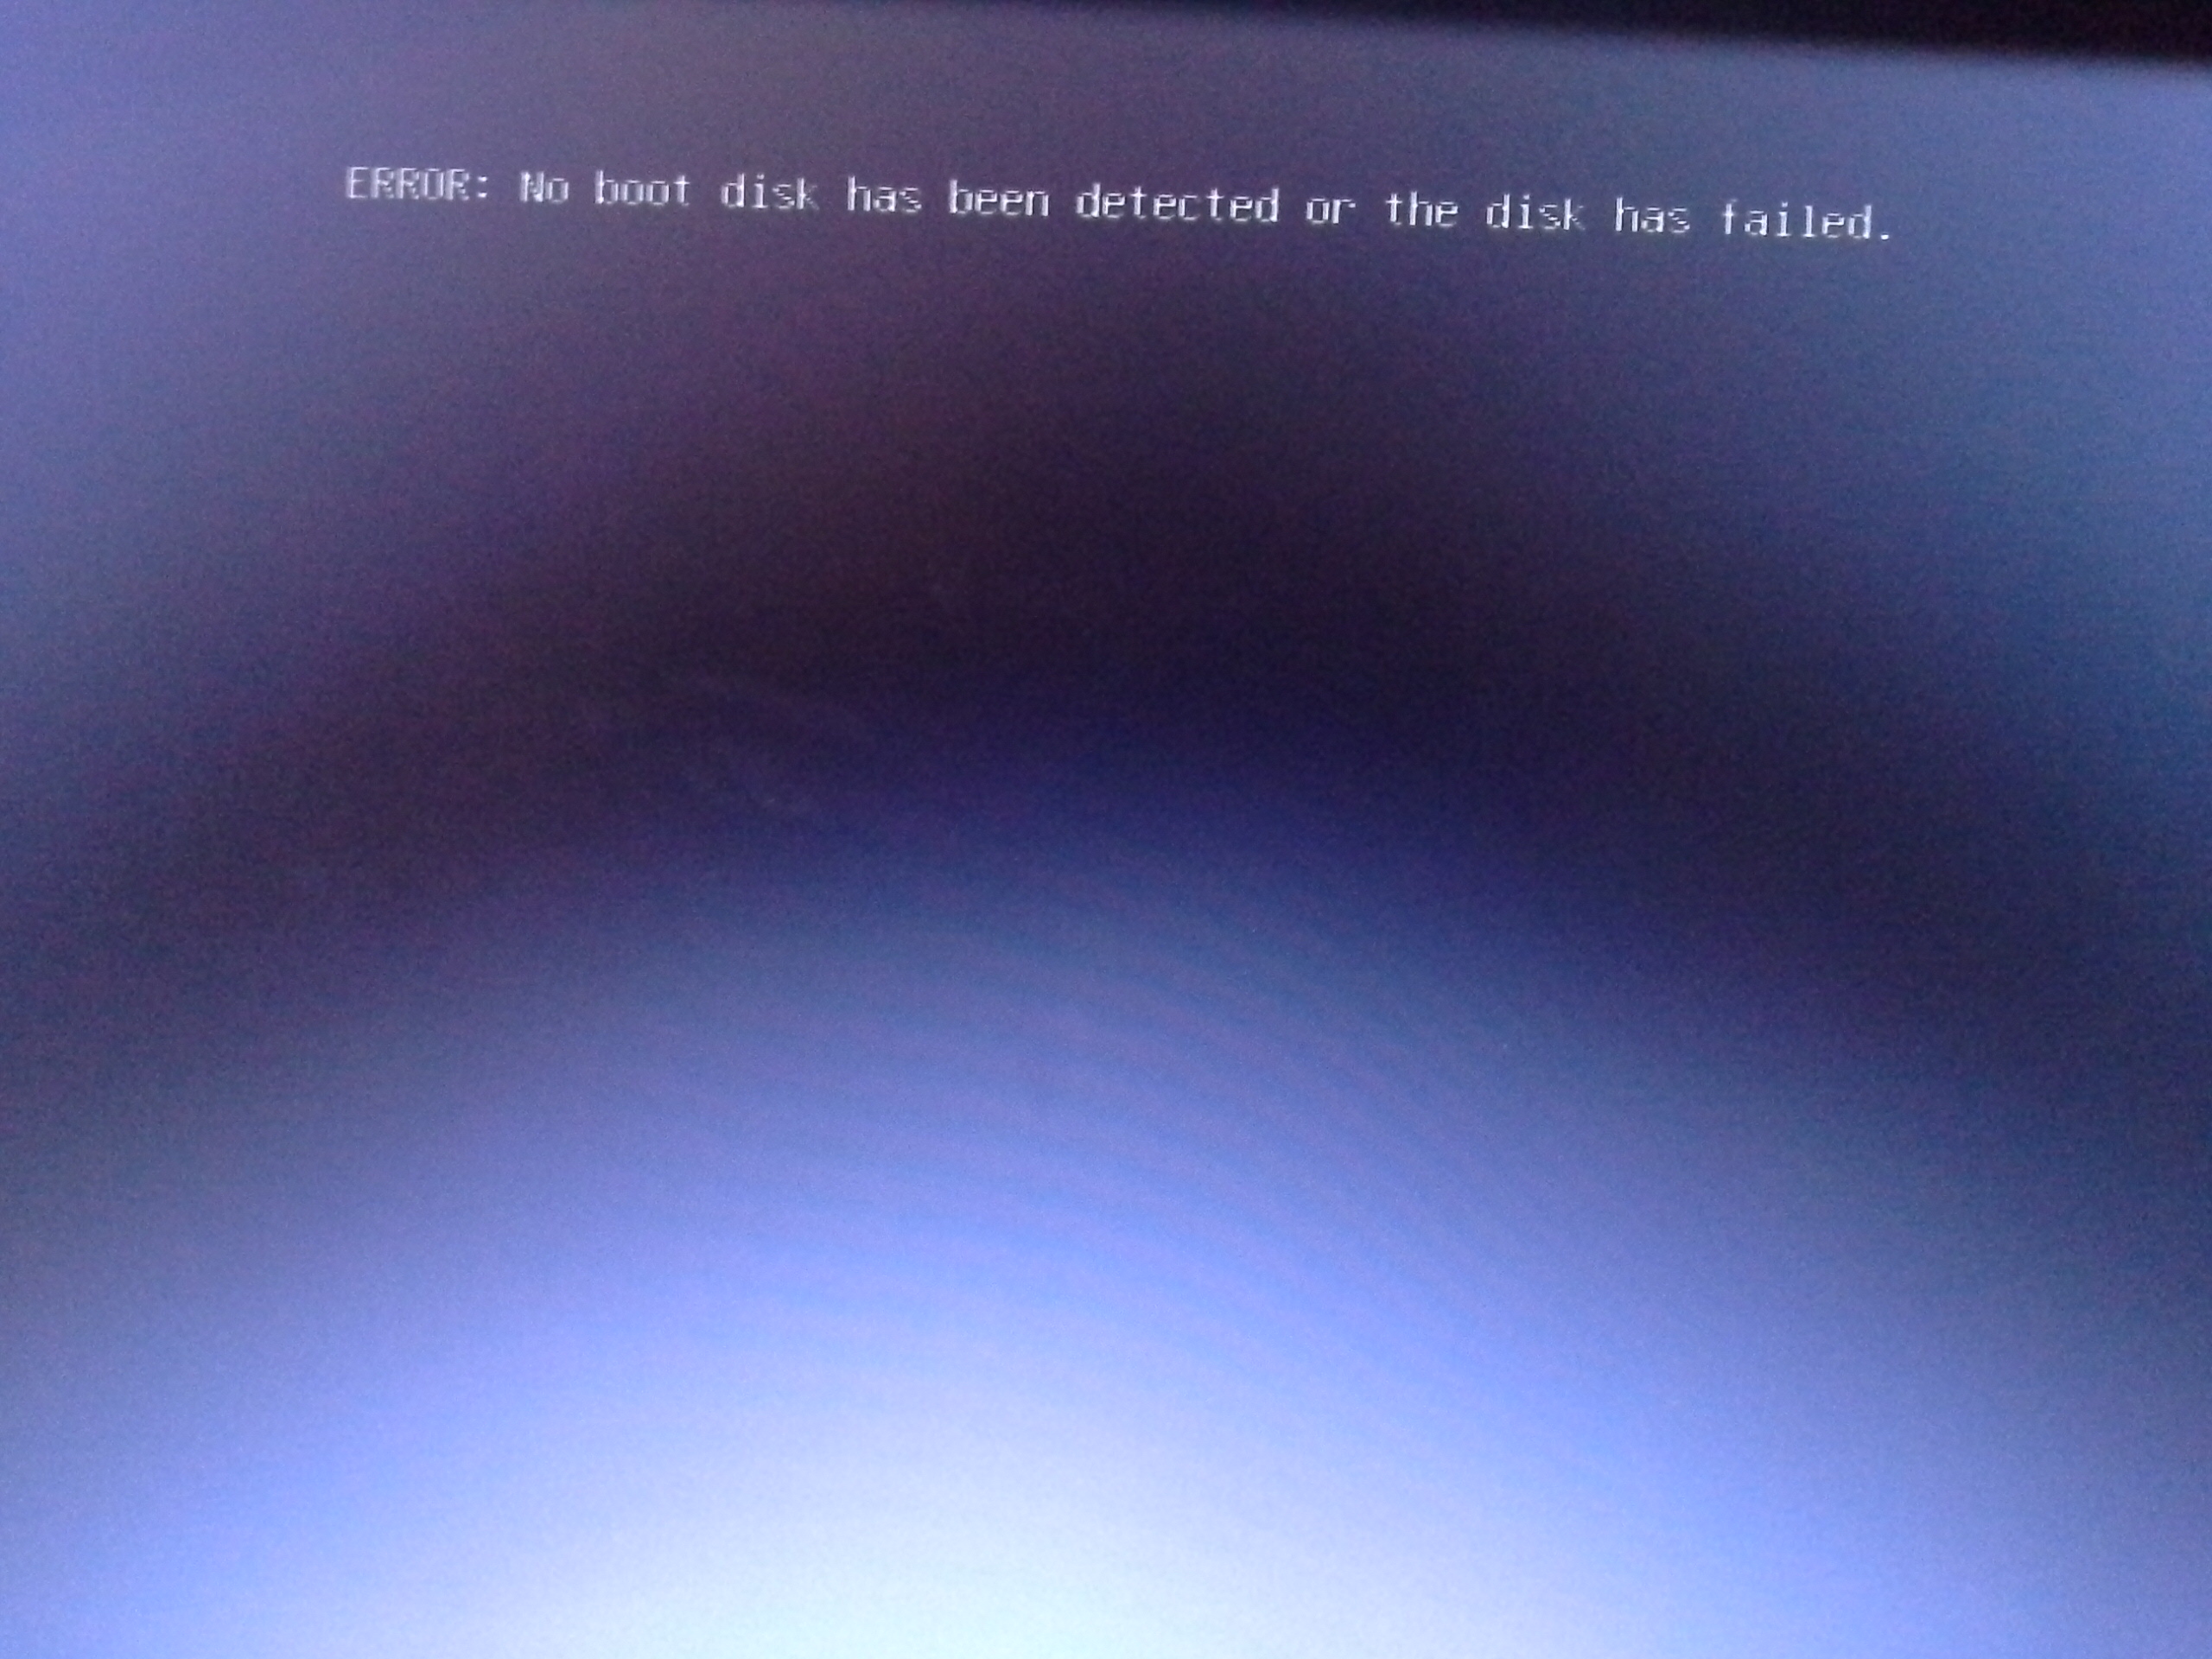 The system has failed. No Boot Disk has been detected. No Boot Disk has been detected or the Disk has failed. Disk Boot failure detected. Disk Boot failure Insert System Disk and Press enter.